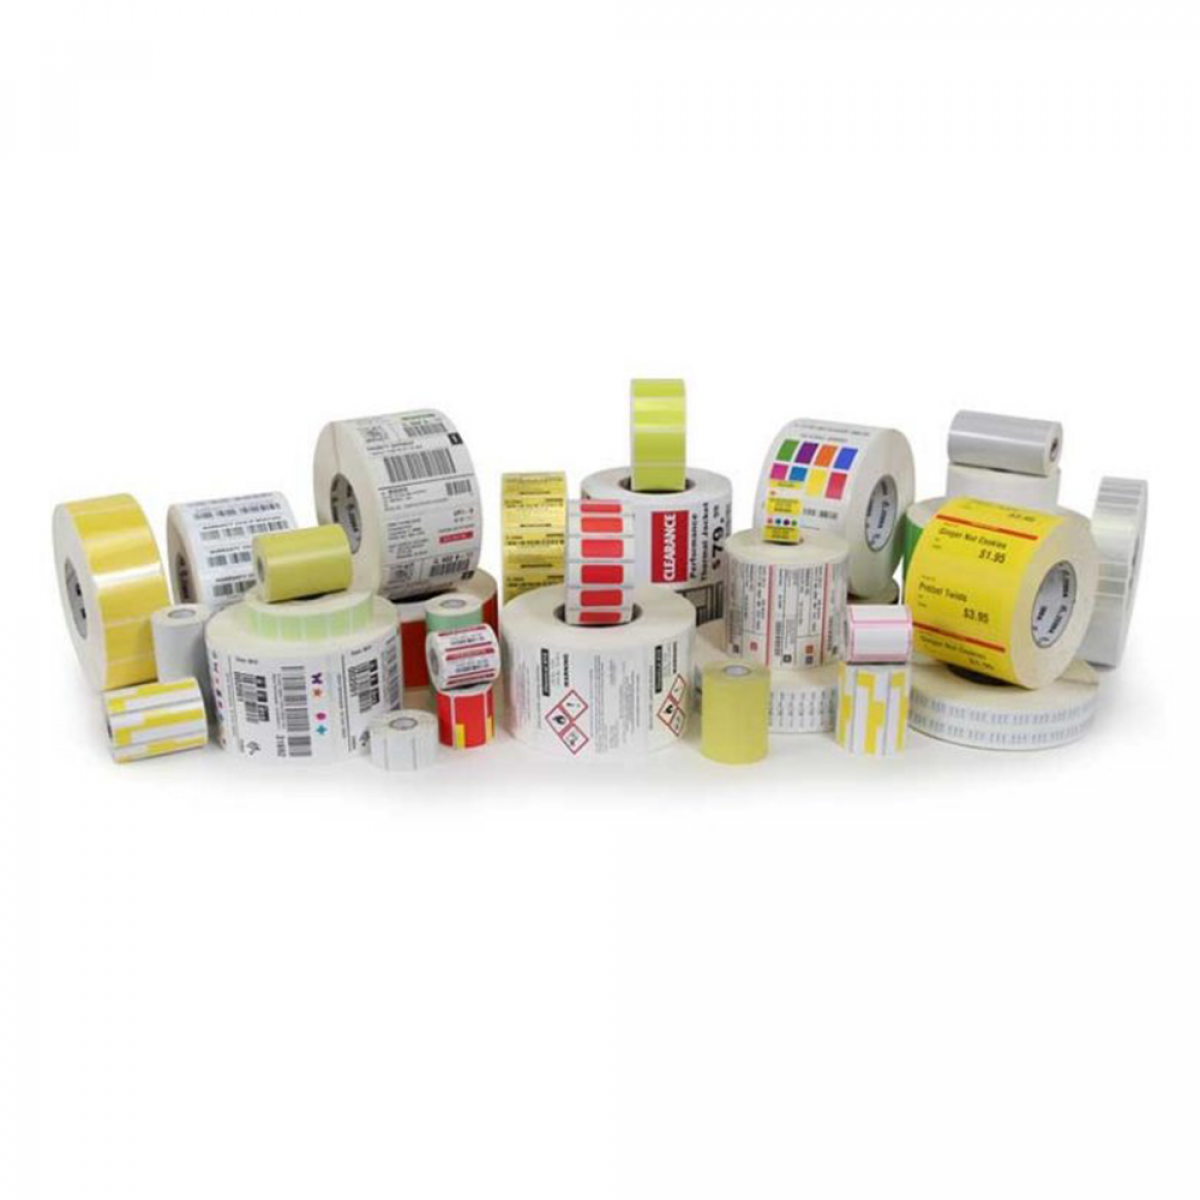 Printing supplies and custom labels